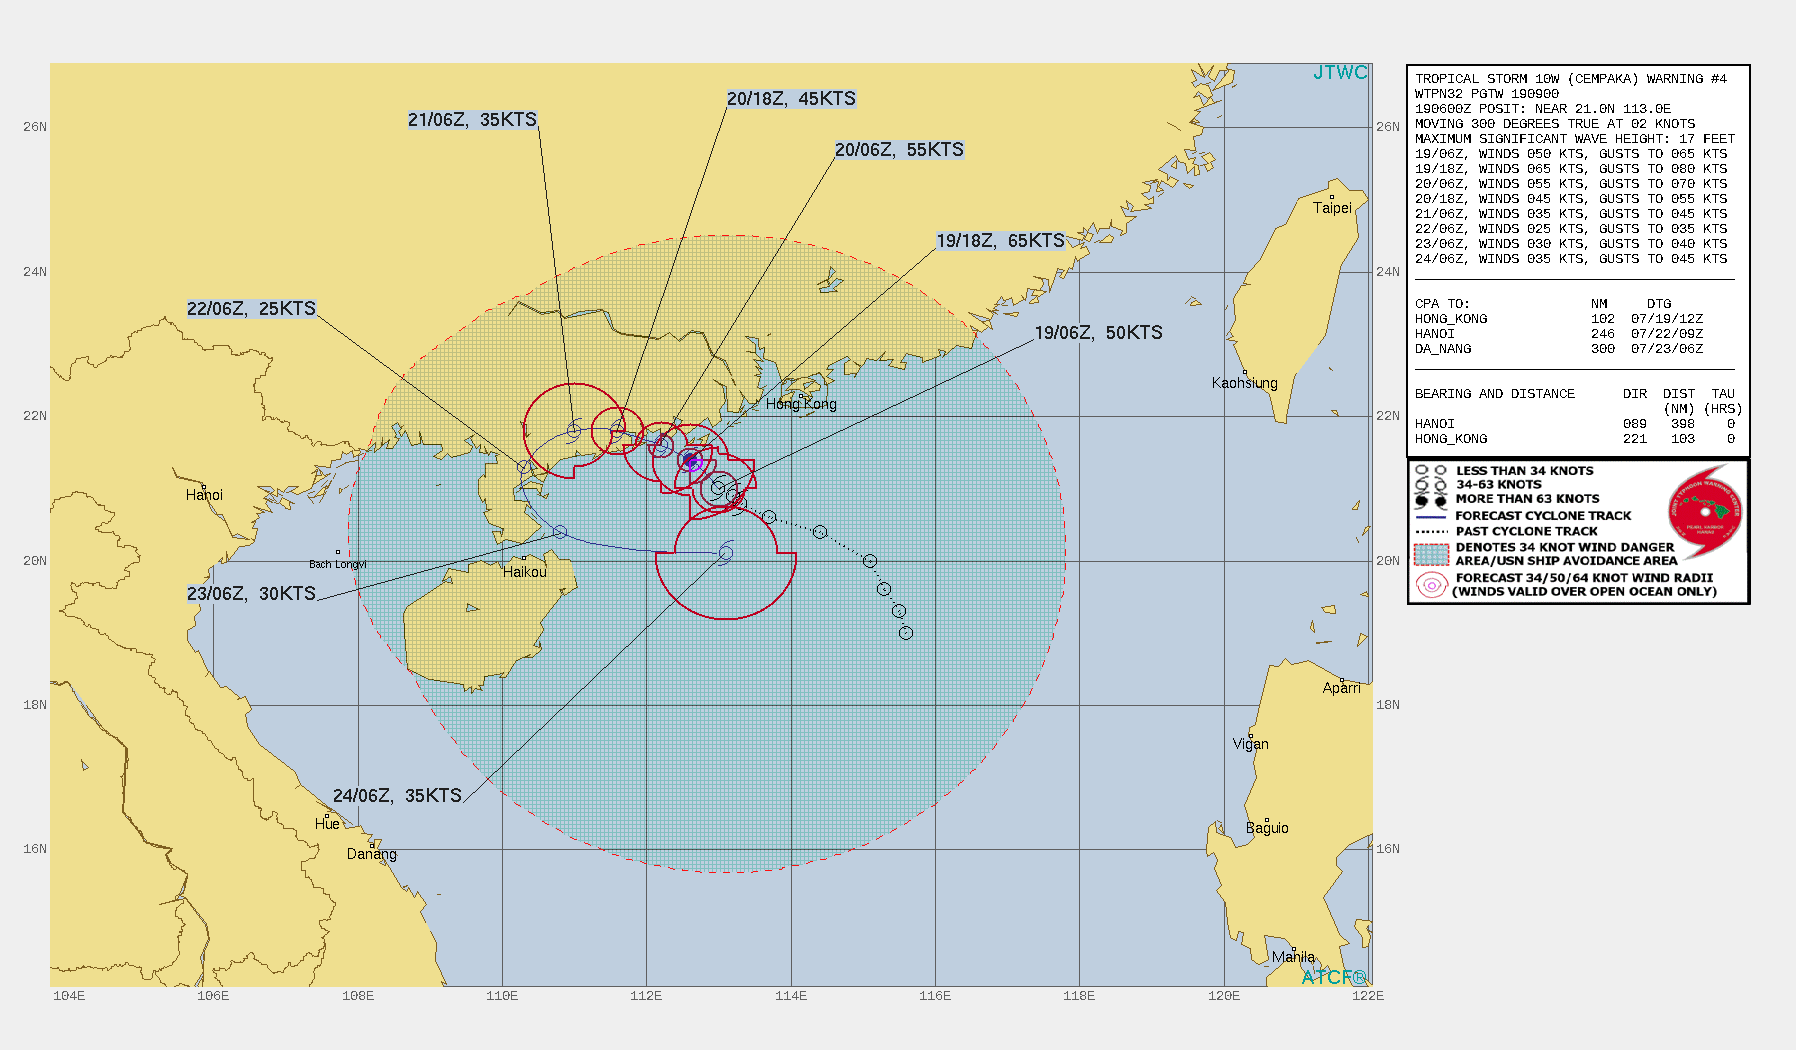 TS 10W(CEMPAKA). WARNING 4 ISSUED AT 19/09UTC.THERE ARE NO SIGNIFICANT CHANGES TO THE FORECAST FROM THE PREVIOUS WARNING.  FORECAST DISCUSSION: TS 10W IS FORECAST TO TRACK SLOWLY WEST-NORTHWESTWARD THROUGH 36H UNDER THE STEERING INFLUENCE OF THE WEAK SUBTROPICAL RIDGE TO THE NORTH. AFTER 36H, THE SYSTEM WILL TRACK WITHIN COMPETING STEERING INFLUENCES AND TURN SOUTHWESTWARD THROUGH 72H. IN THE EXTENDED PERIOD, TS 10W WILL TURN SOUTHEASTWARD TO EASTWARD UNDER THE STEERING INFLUENCE OF STRENGTHENING LOW-LEVEL WESTERLY FLOW. IN GENERAL, THE NUMERICAL MODEL GUIDANCE SUPPORTS THE FORECAST TRACK, HOWEVER, THERE IS A LARGE DEGREE OF SPREAD DUE TO THE COMPLEX, EVOLVING SYNOPTIC STEERING ENVIRONMENT. TS 10W SHOULD INTENSIFY QUICKLY TO A PEAK OF 65 KNOTS/CAT 1 BY 12H JUST PRIOR TO LANDFALL WITH STEADY WEAKENING AS THE SYSTEM TRACKS OVER  LAND. TS 10W WILL LIKELY RE-INTENSIFY NEAR 120H AFTER REEMERGING  BACK OVER WATER.